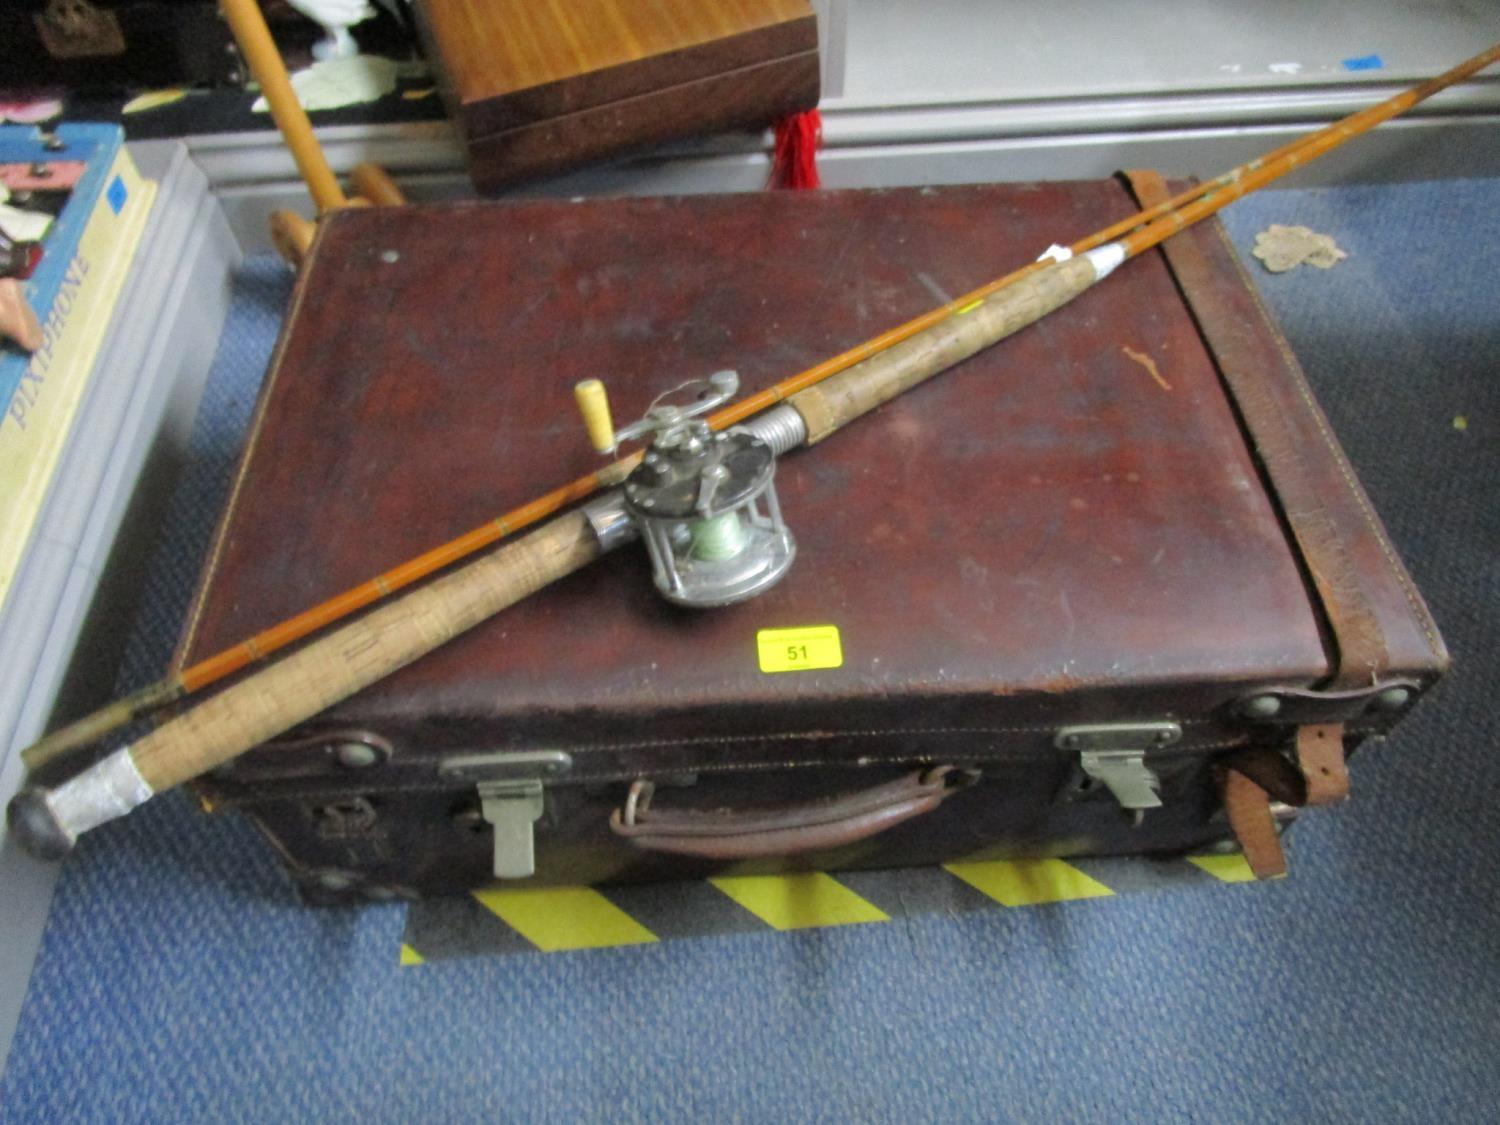 A Darnborough & Sons vintage leather travelling case and a split cane fishing rod with a Penn reel